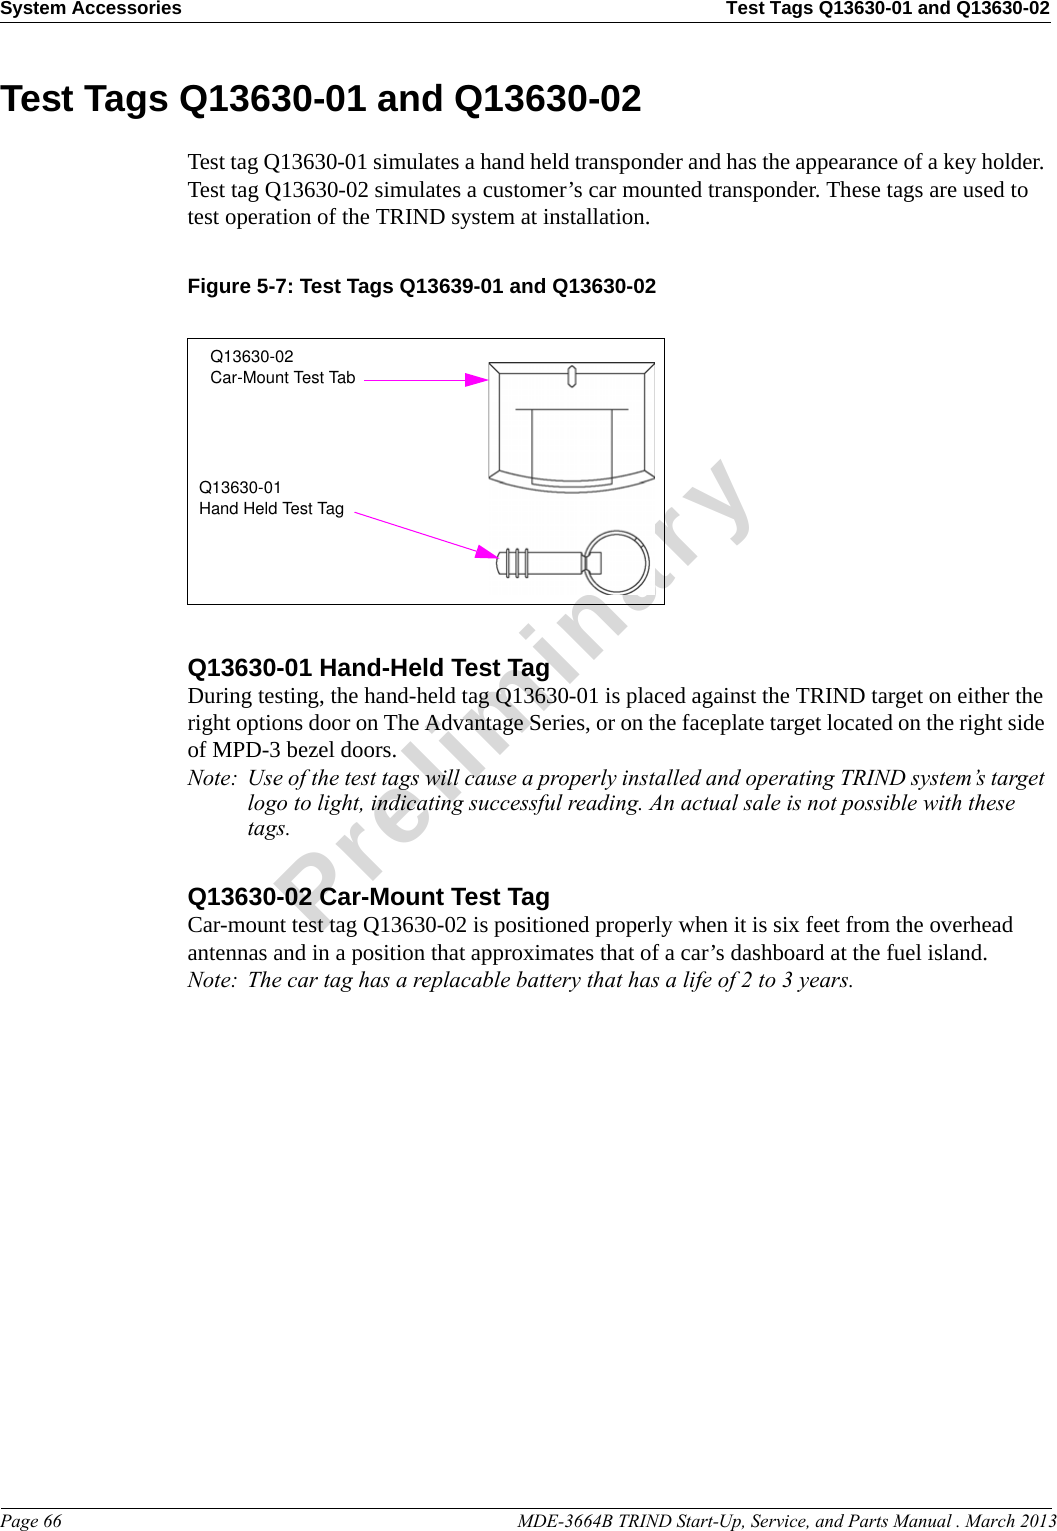 System Accessories Test Tags Q13630-01 and Q13630-02Page 66                                                                                                  MDE-3664B TRIND Start-Up, Service, and Parts Manual . March 2013PreliminaryTest Tags Q13630-01 and Q13630-02Test tag Q13630-01 simulates a hand held transponder and has the appearance of a key holder. Test tag Q13630-02 simulates a customer’s car mounted transponder. These tags are used to test operation of the TRIND system at installation.Figure 5-7: Test Tags Q13639-01 and Q13630-02Q13630-02Car-Mount Test TabQ13630-01Hand Held Test TagQ13630-01 Hand-Held Test TagDuring testing, the hand-held tag Q13630-01 is placed against the TRIND target on either the right options door on The Advantage Series, or on the faceplate target located on the right side of MPD-3 bezel doors.Note: Use of the test tags will cause a properly installed and operating TRIND system’s target logo to light, indicating successful reading. An actual sale is not possible with these tags.Q13630-02 Car-Mount Test TagCar-mount test tag Q13630-02 is positioned properly when it is six feet from the overhead antennas and in a position that approximates that of a car’s dashboard at the fuel island.Note: The car tag has a replacable battery that has a life of 2 to 3 years.